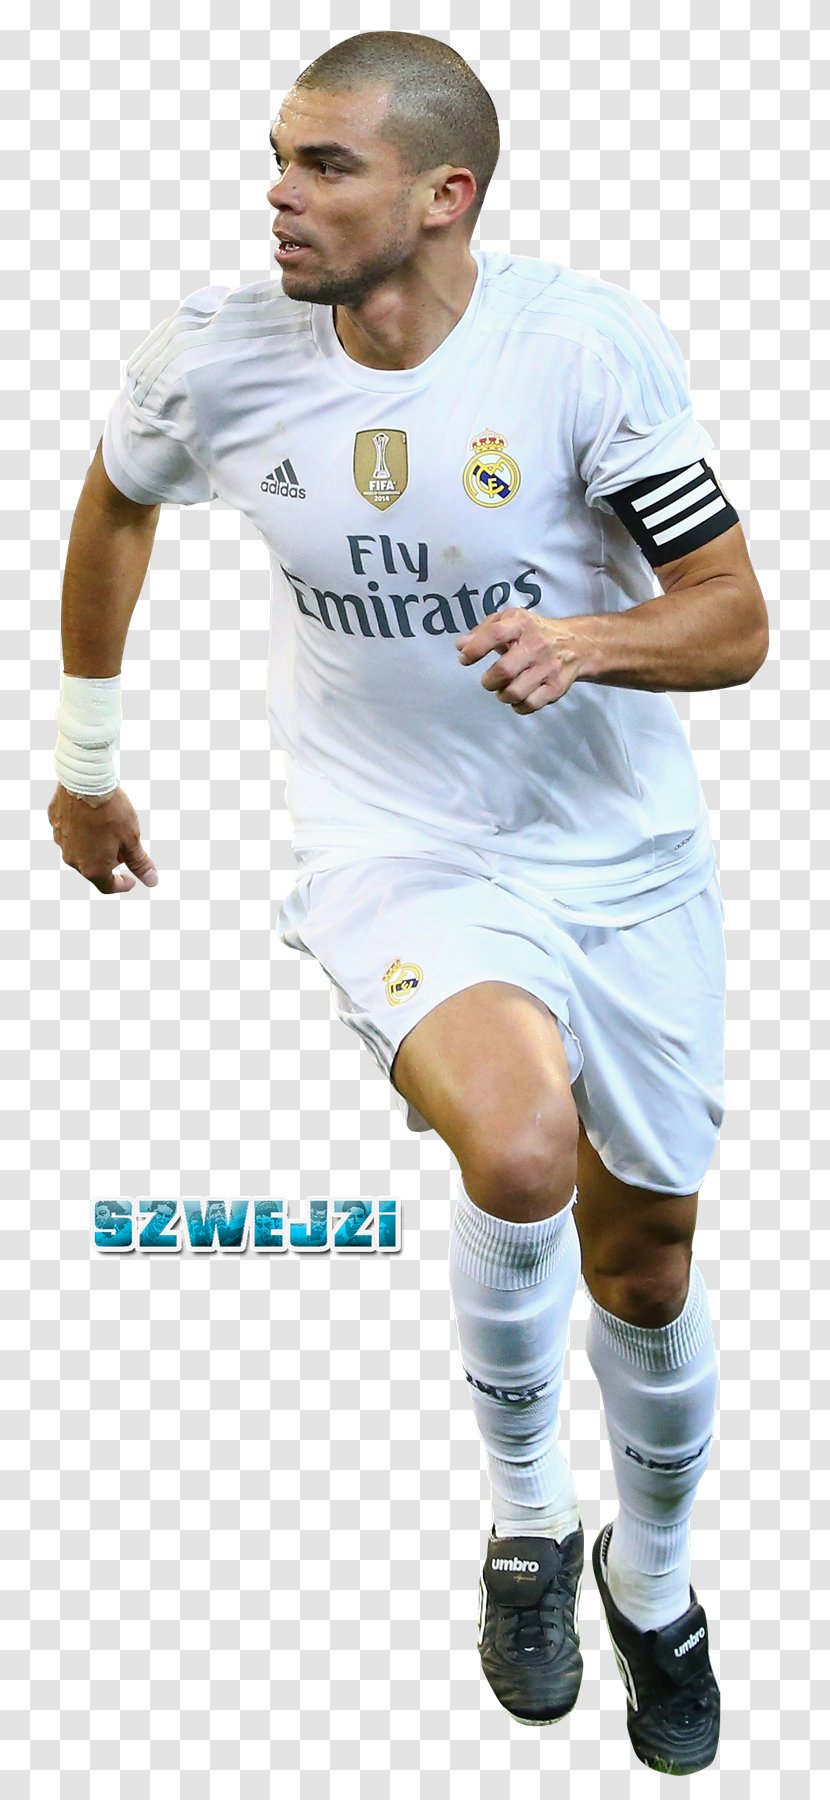 Pepe Real Madrid C.F. Football Image - Sports Equipment Transparent PNG